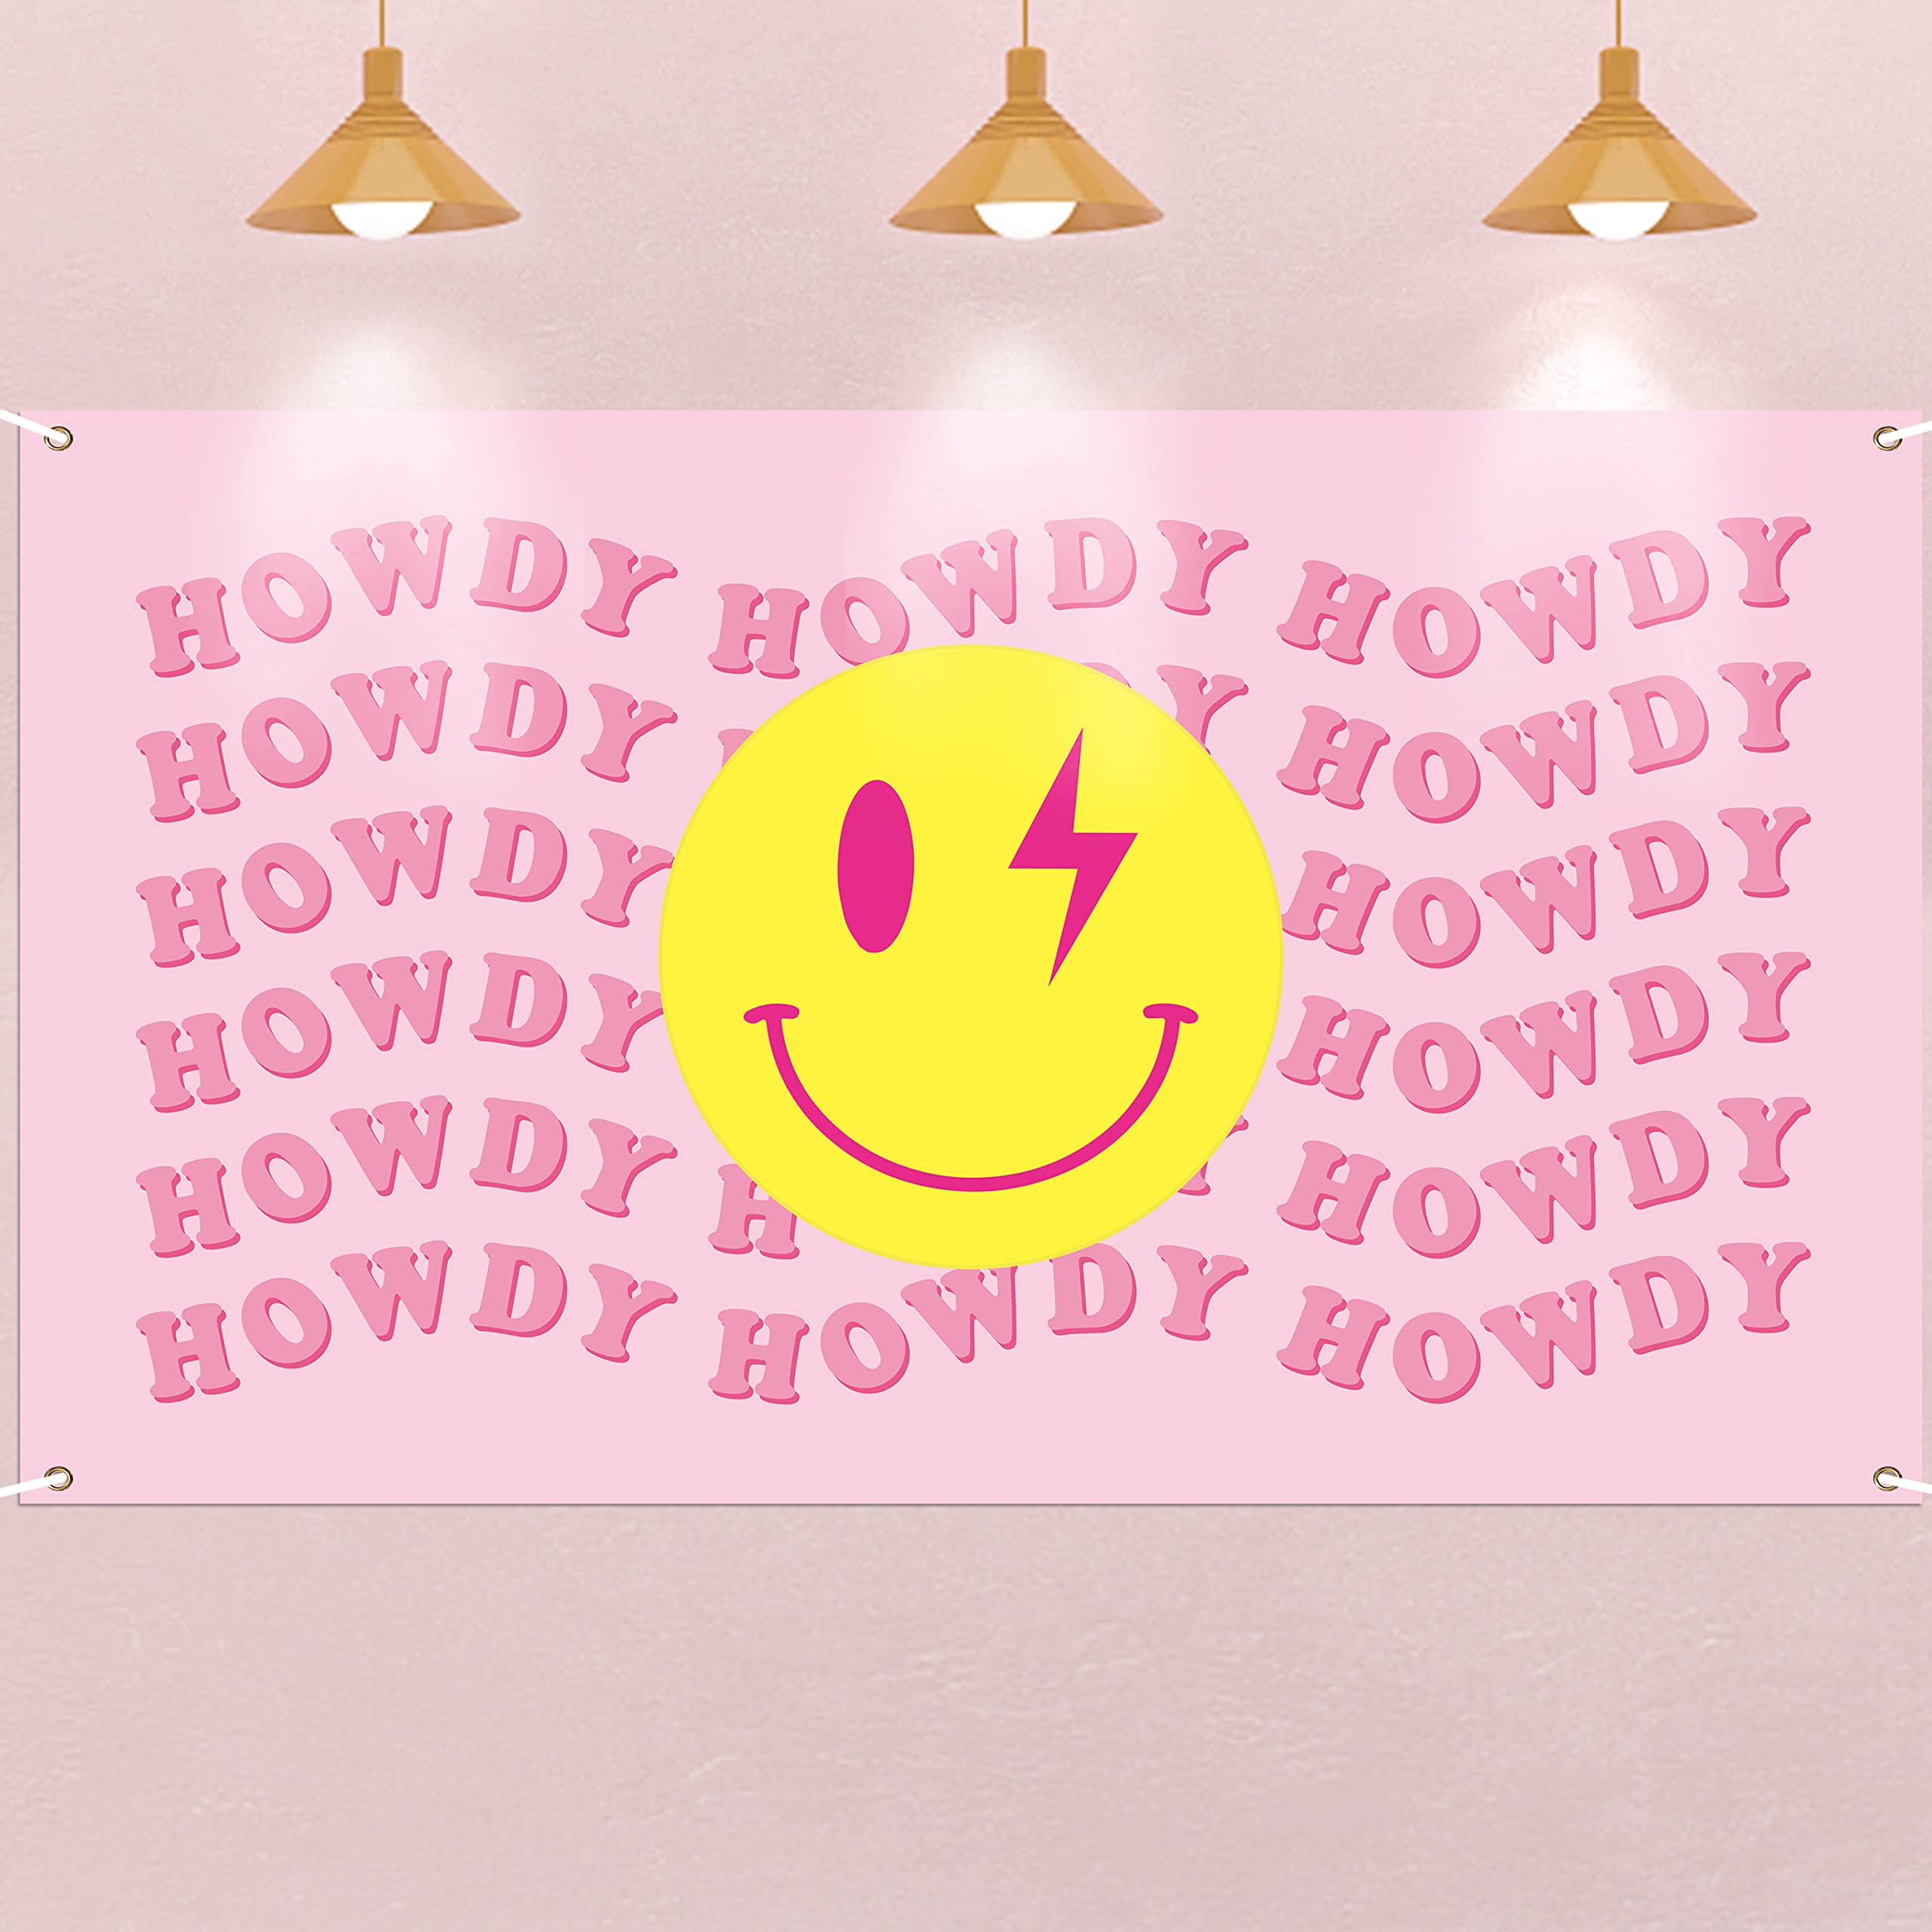 Y1tvei Preppy Cowgirl Room Decor Party Banner Aesthetic Pink Howdy Happy Face Tapestry Backdrop Modern Preppy Photography Background for Teen Girls Bedroom College Dorm Wall Hanging Props Photo Booth